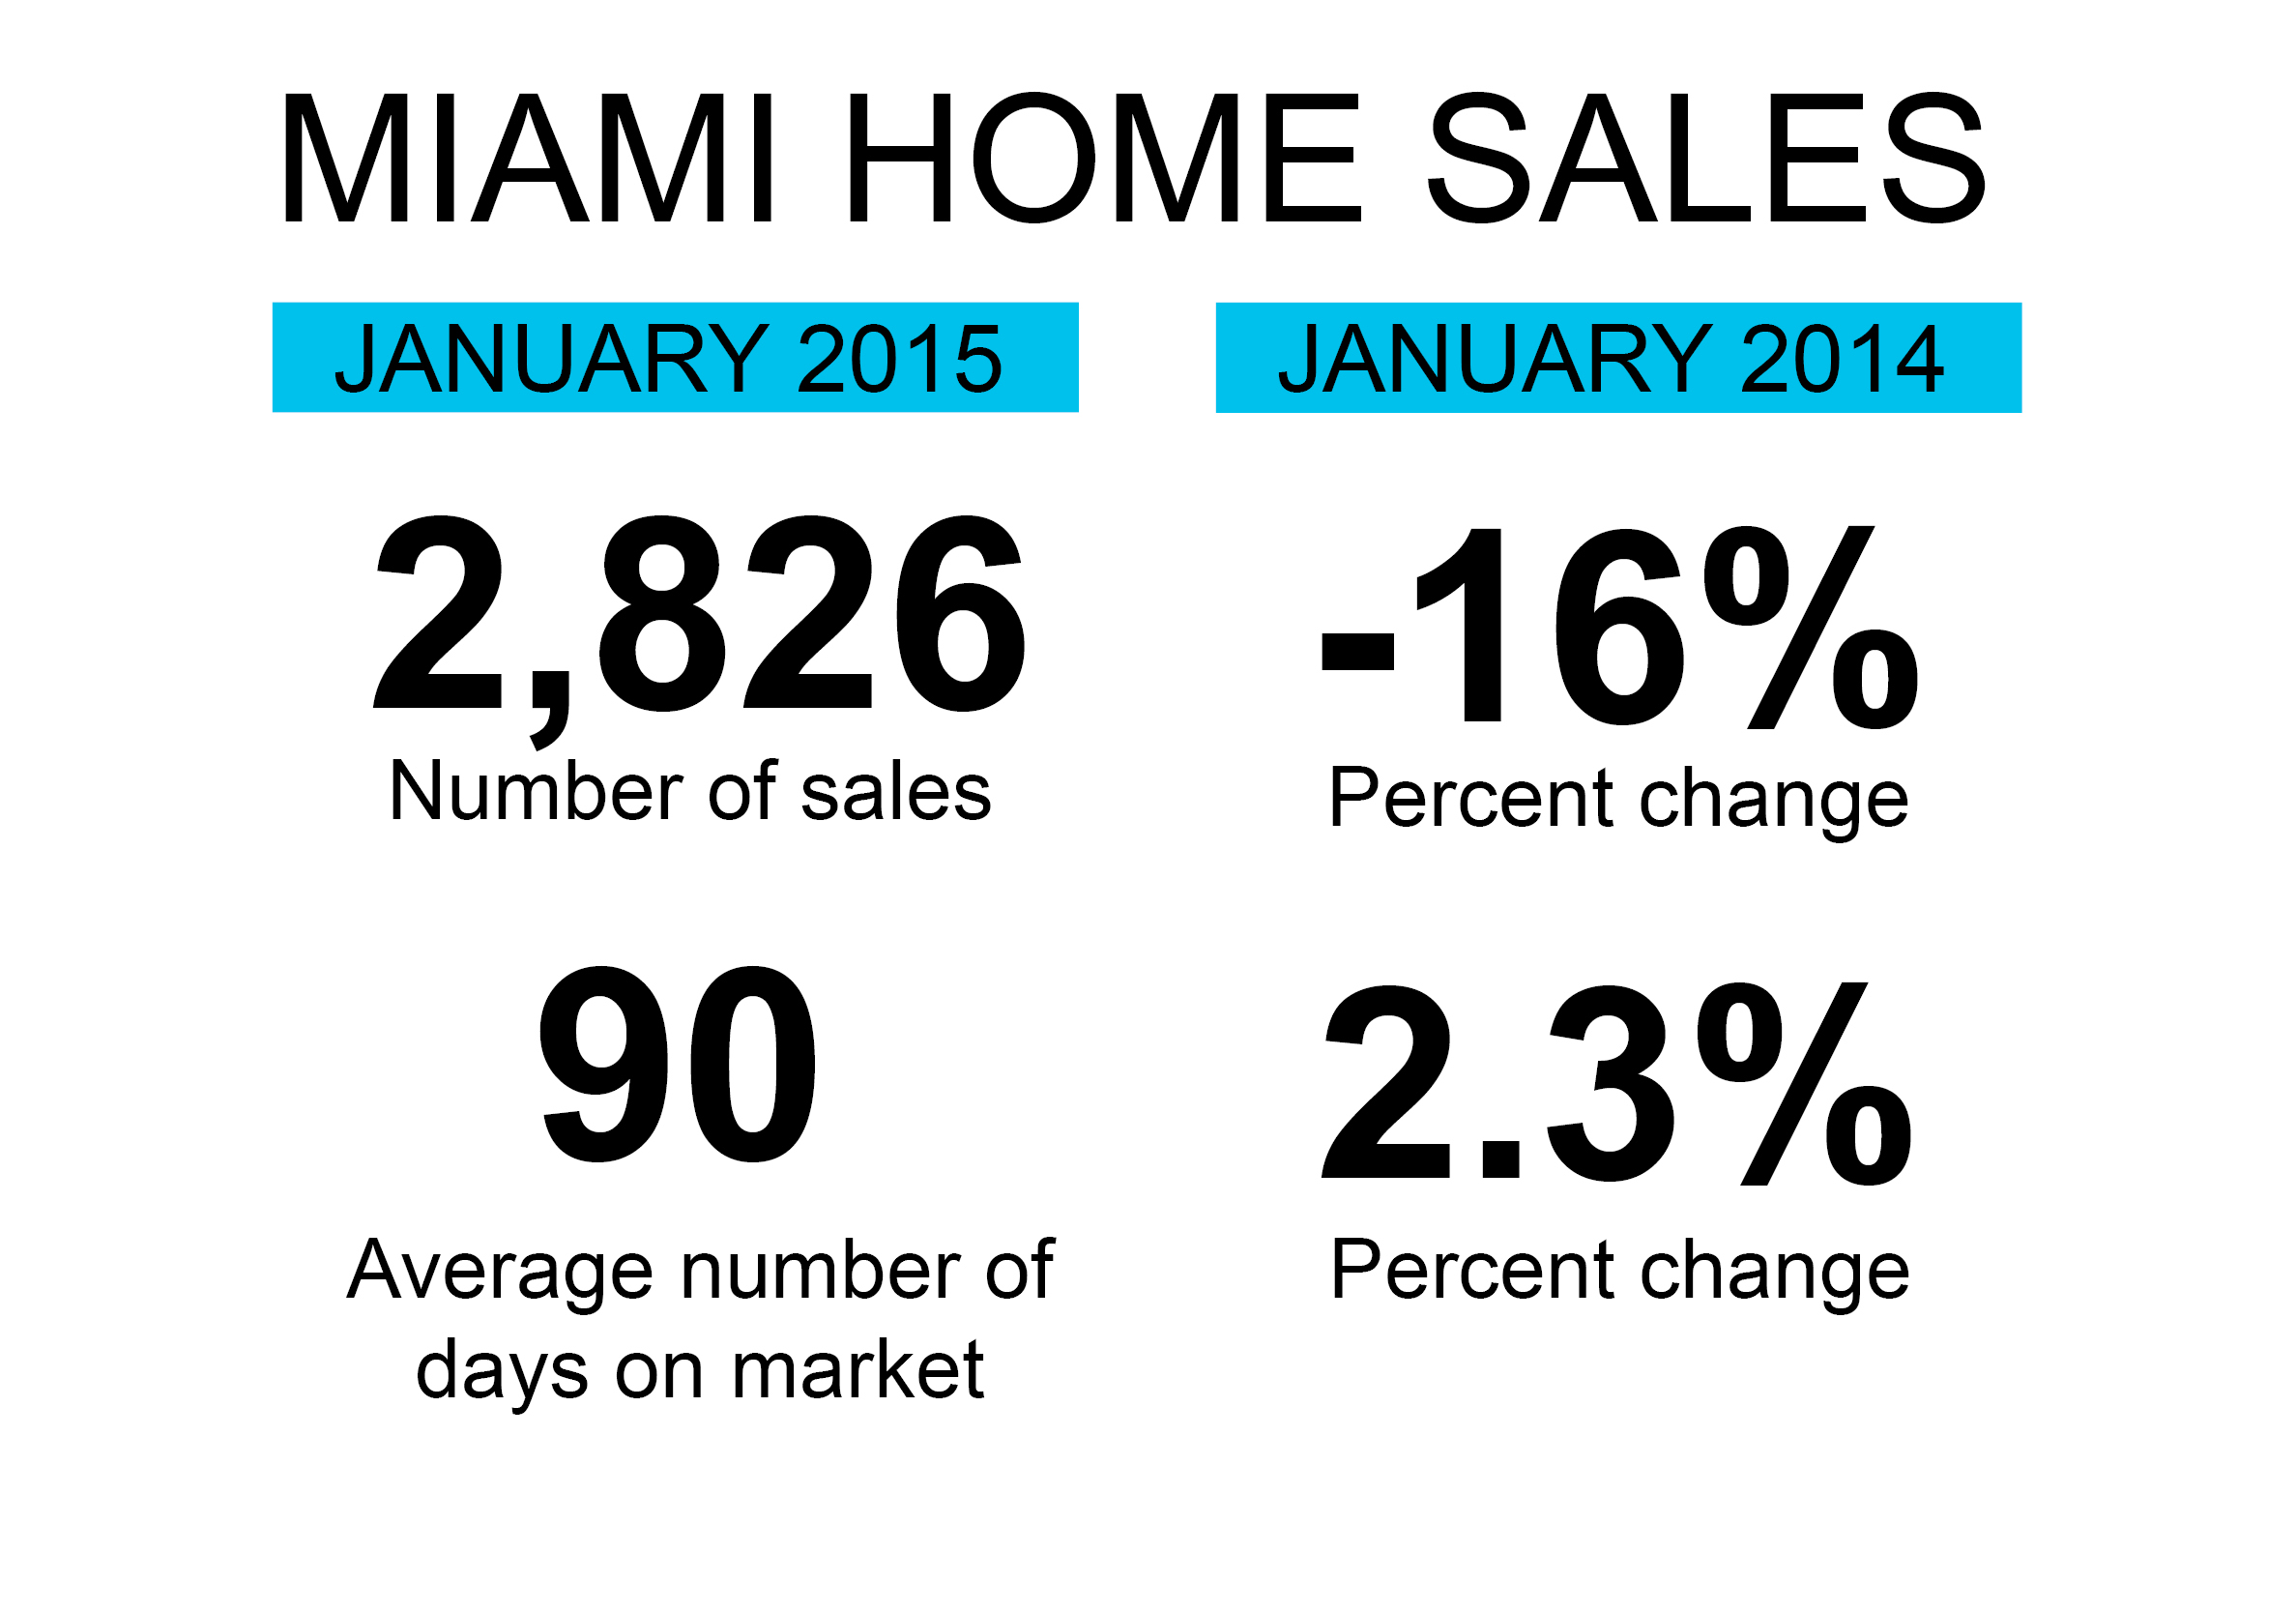 Home sales in Miami as of January